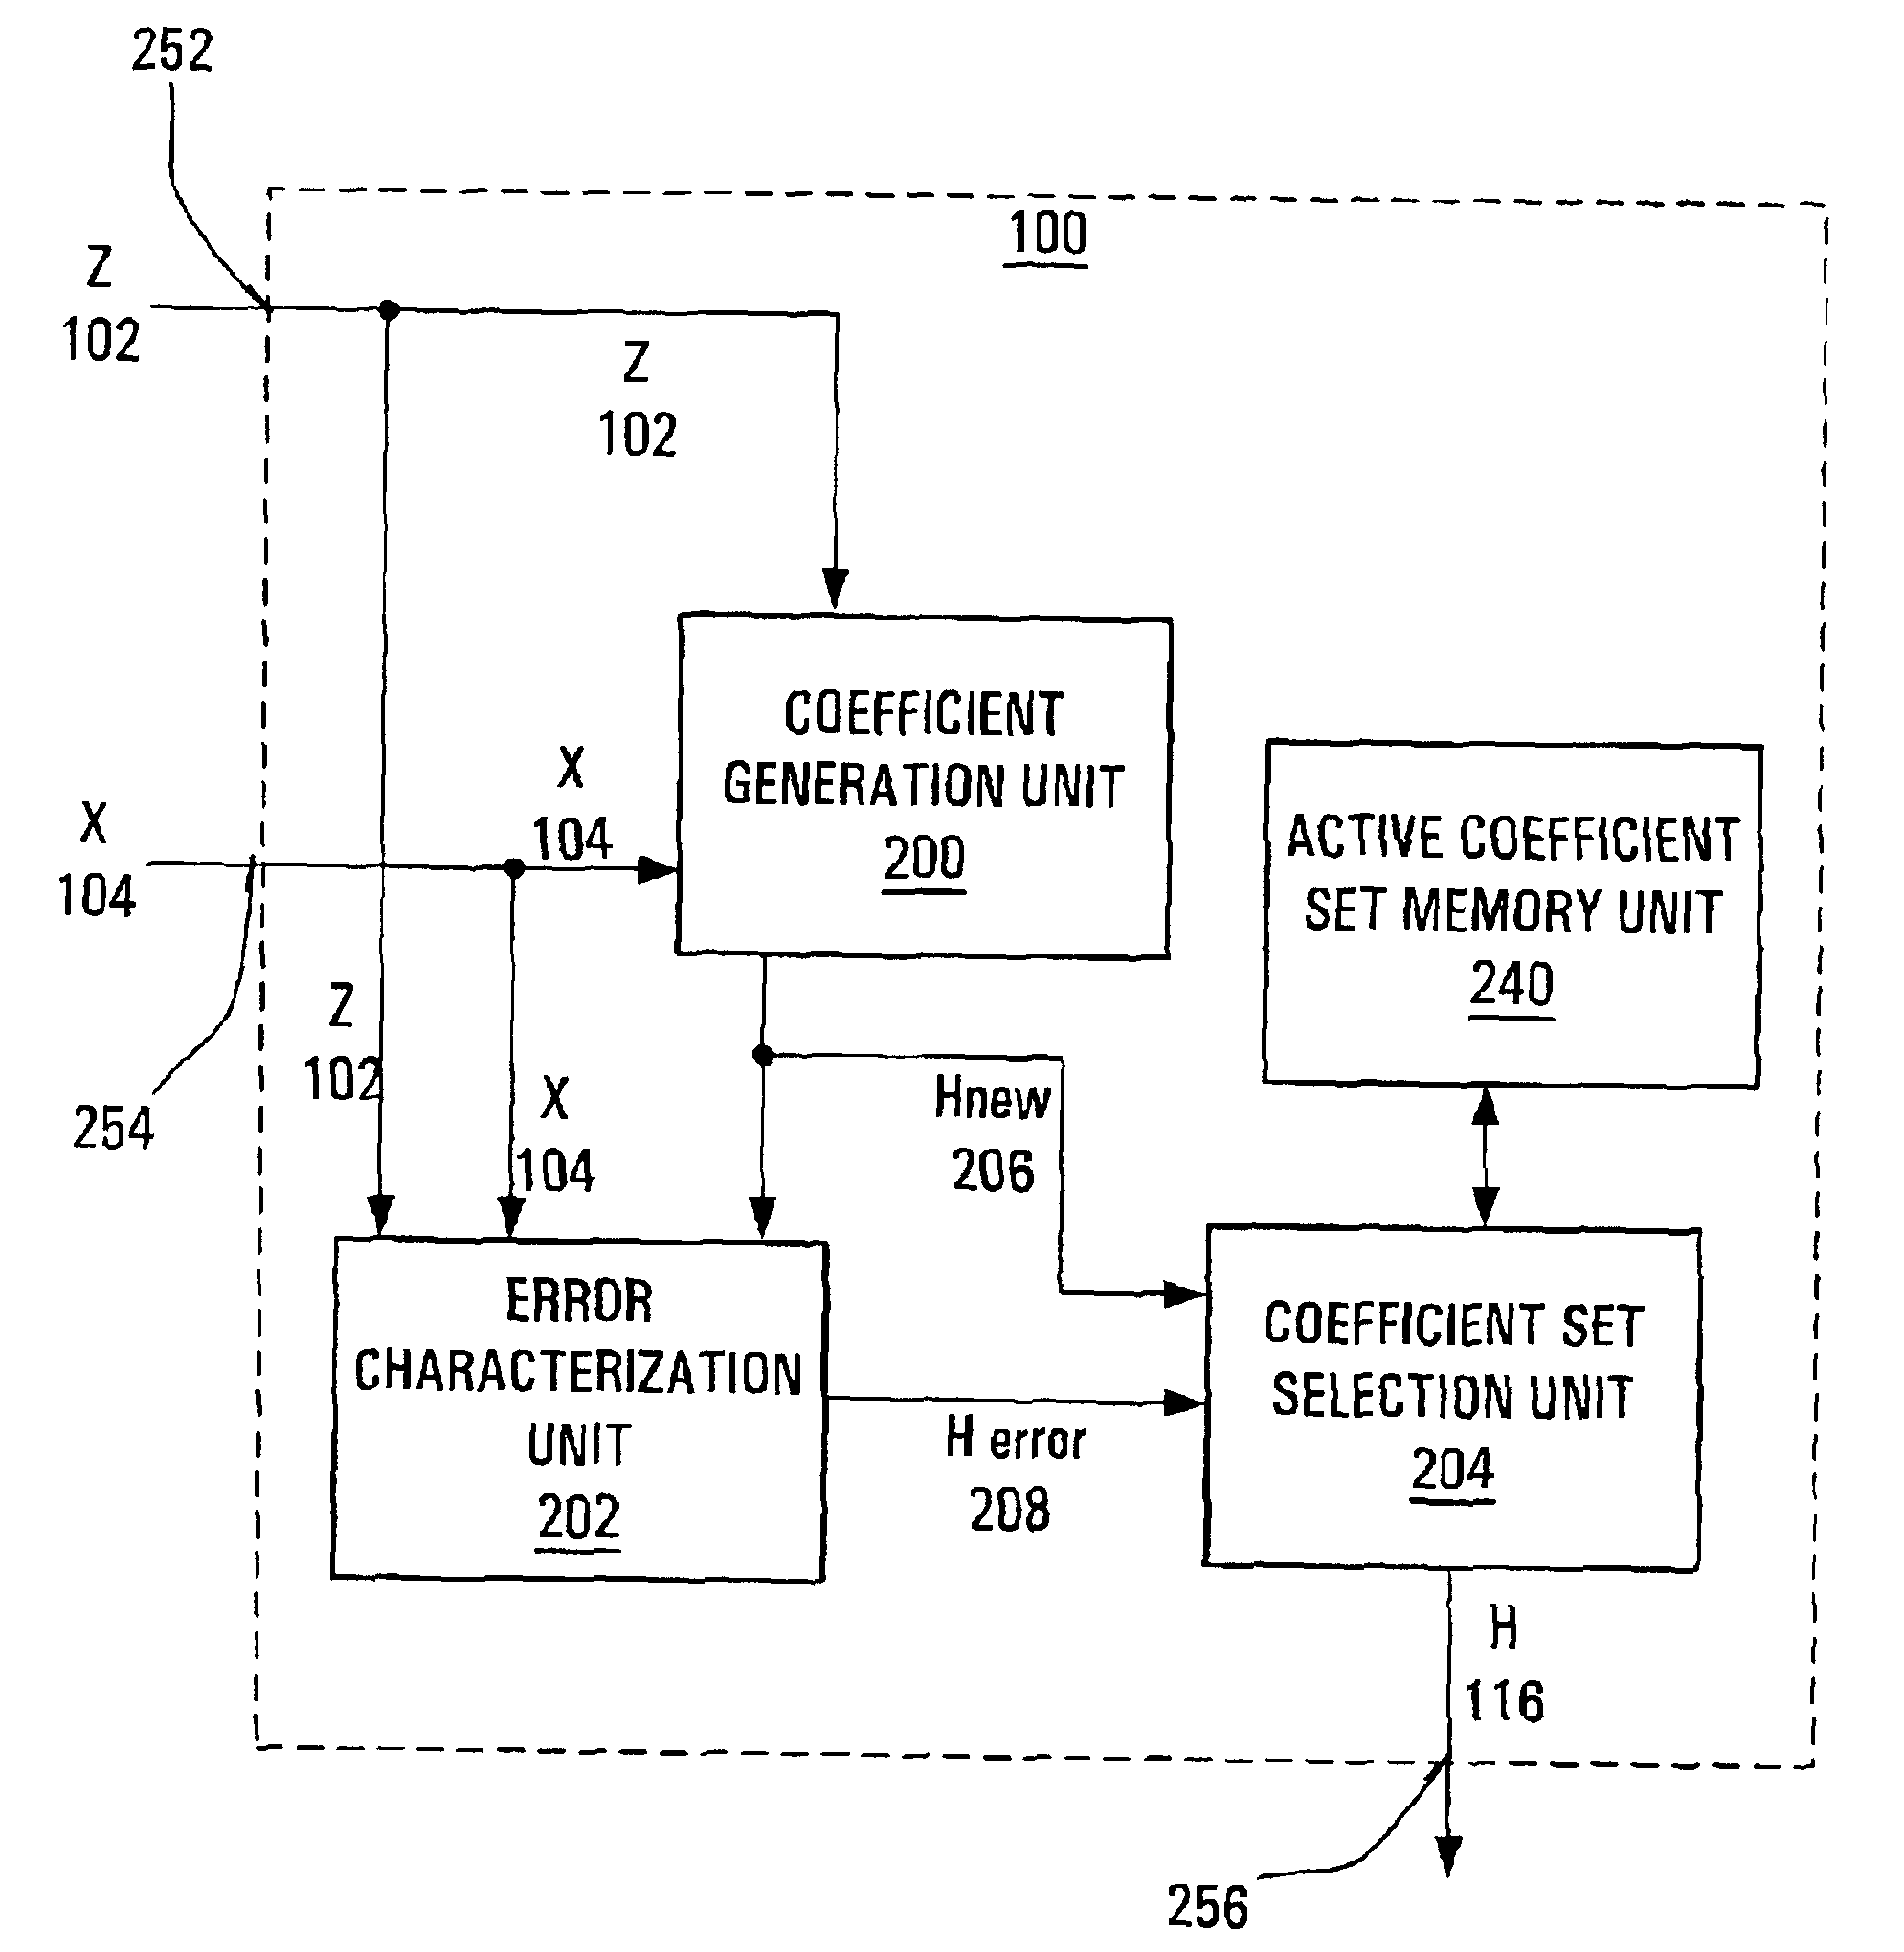 Method and apparatus for providing an error characterization estimate of an impulse response derived using least squares